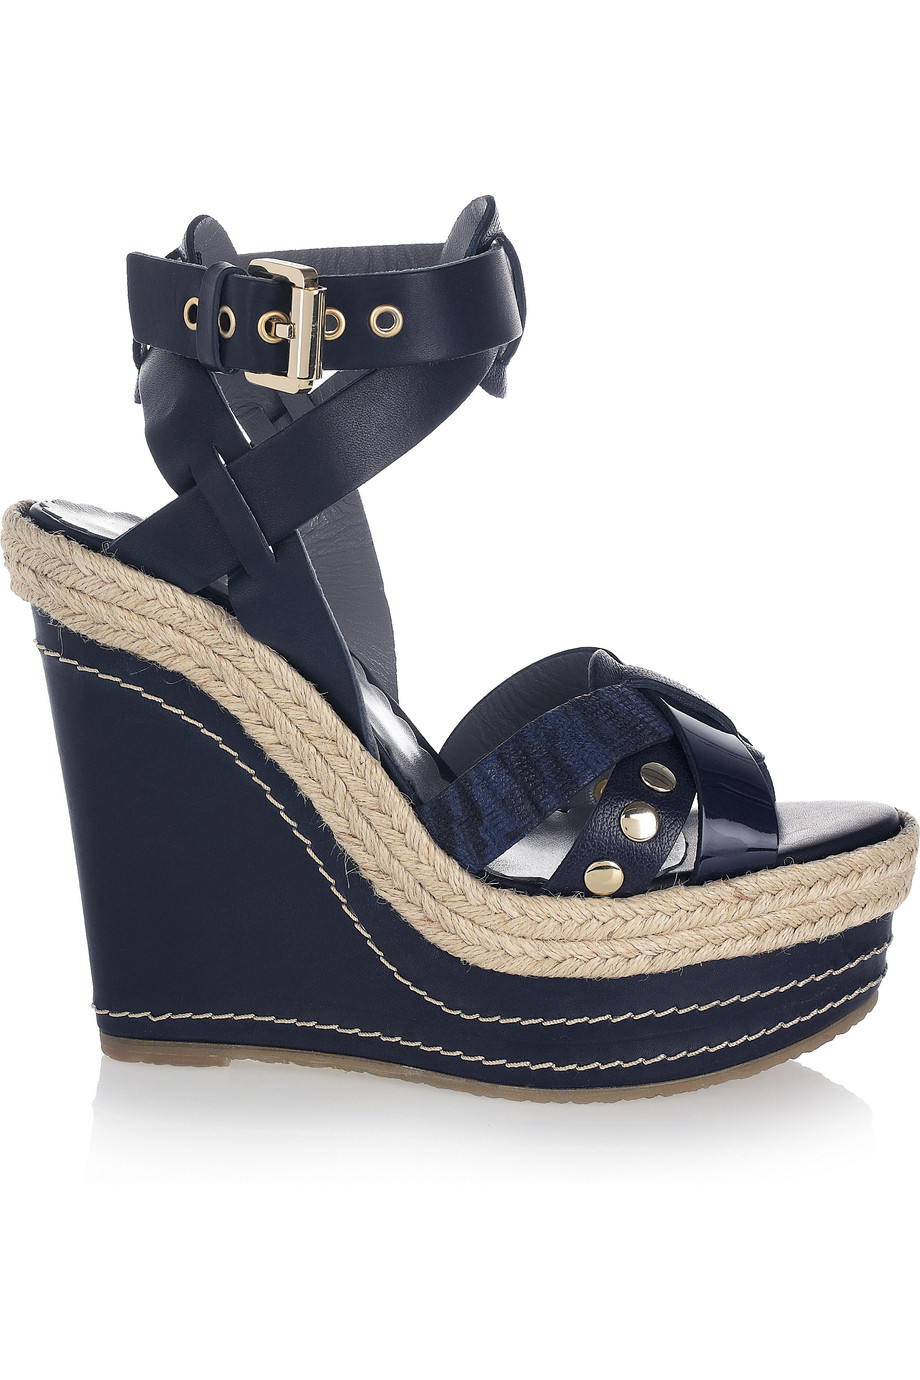 Mulberry Leather Wedge Sandals in Navy (Blue) - Lyst